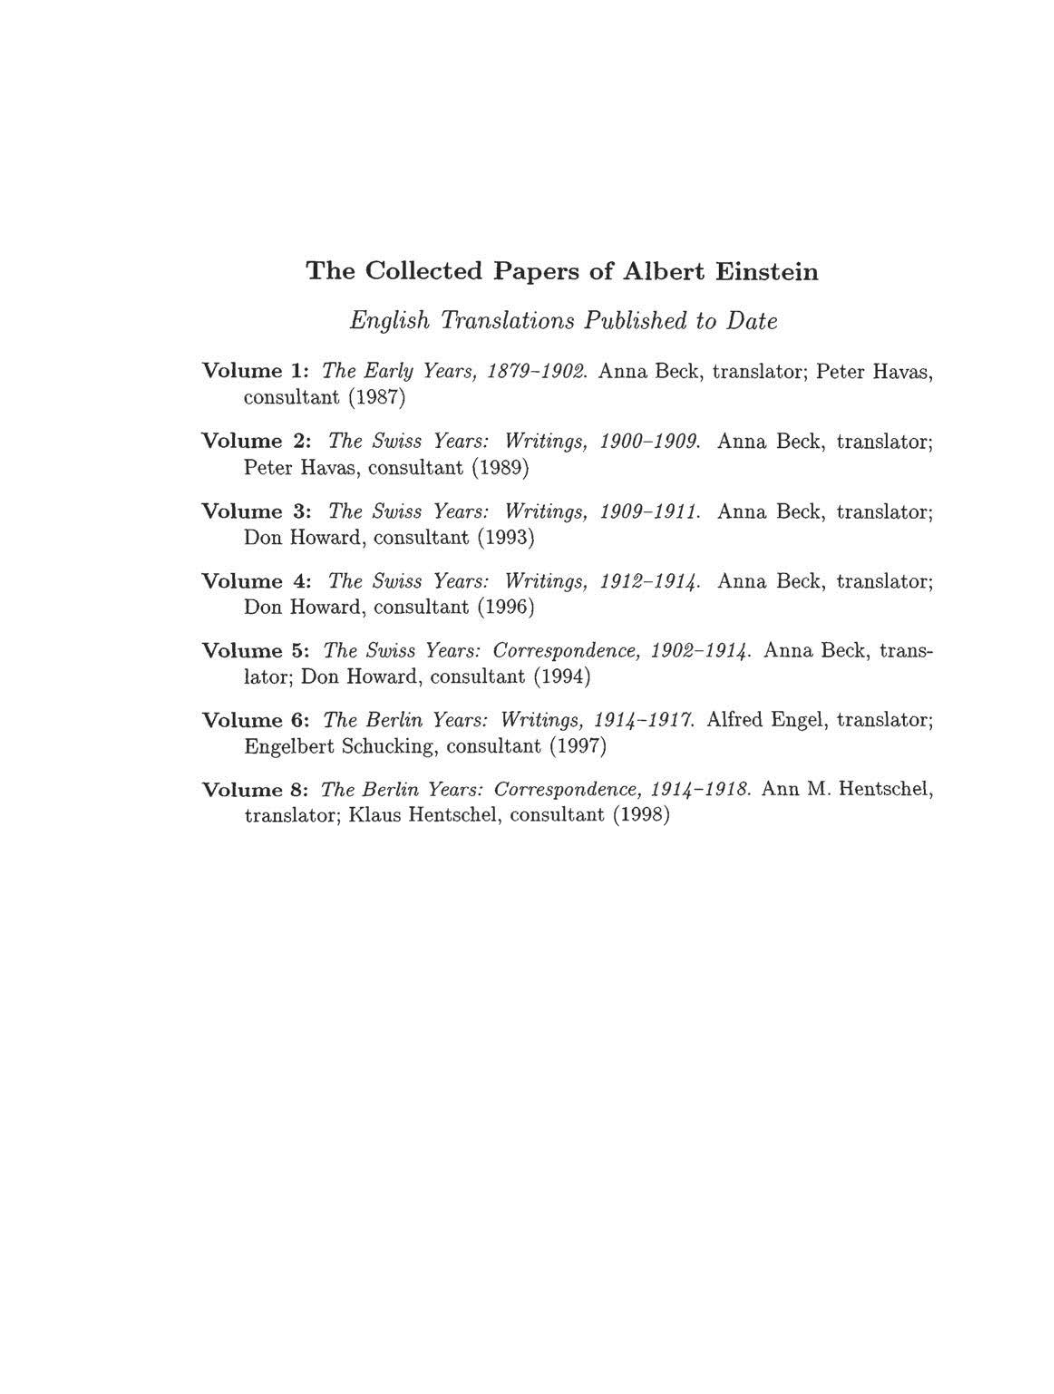 Volume 8: The Berlin Years: Correspondence, 1914-1918 (English translation supplement) page ii